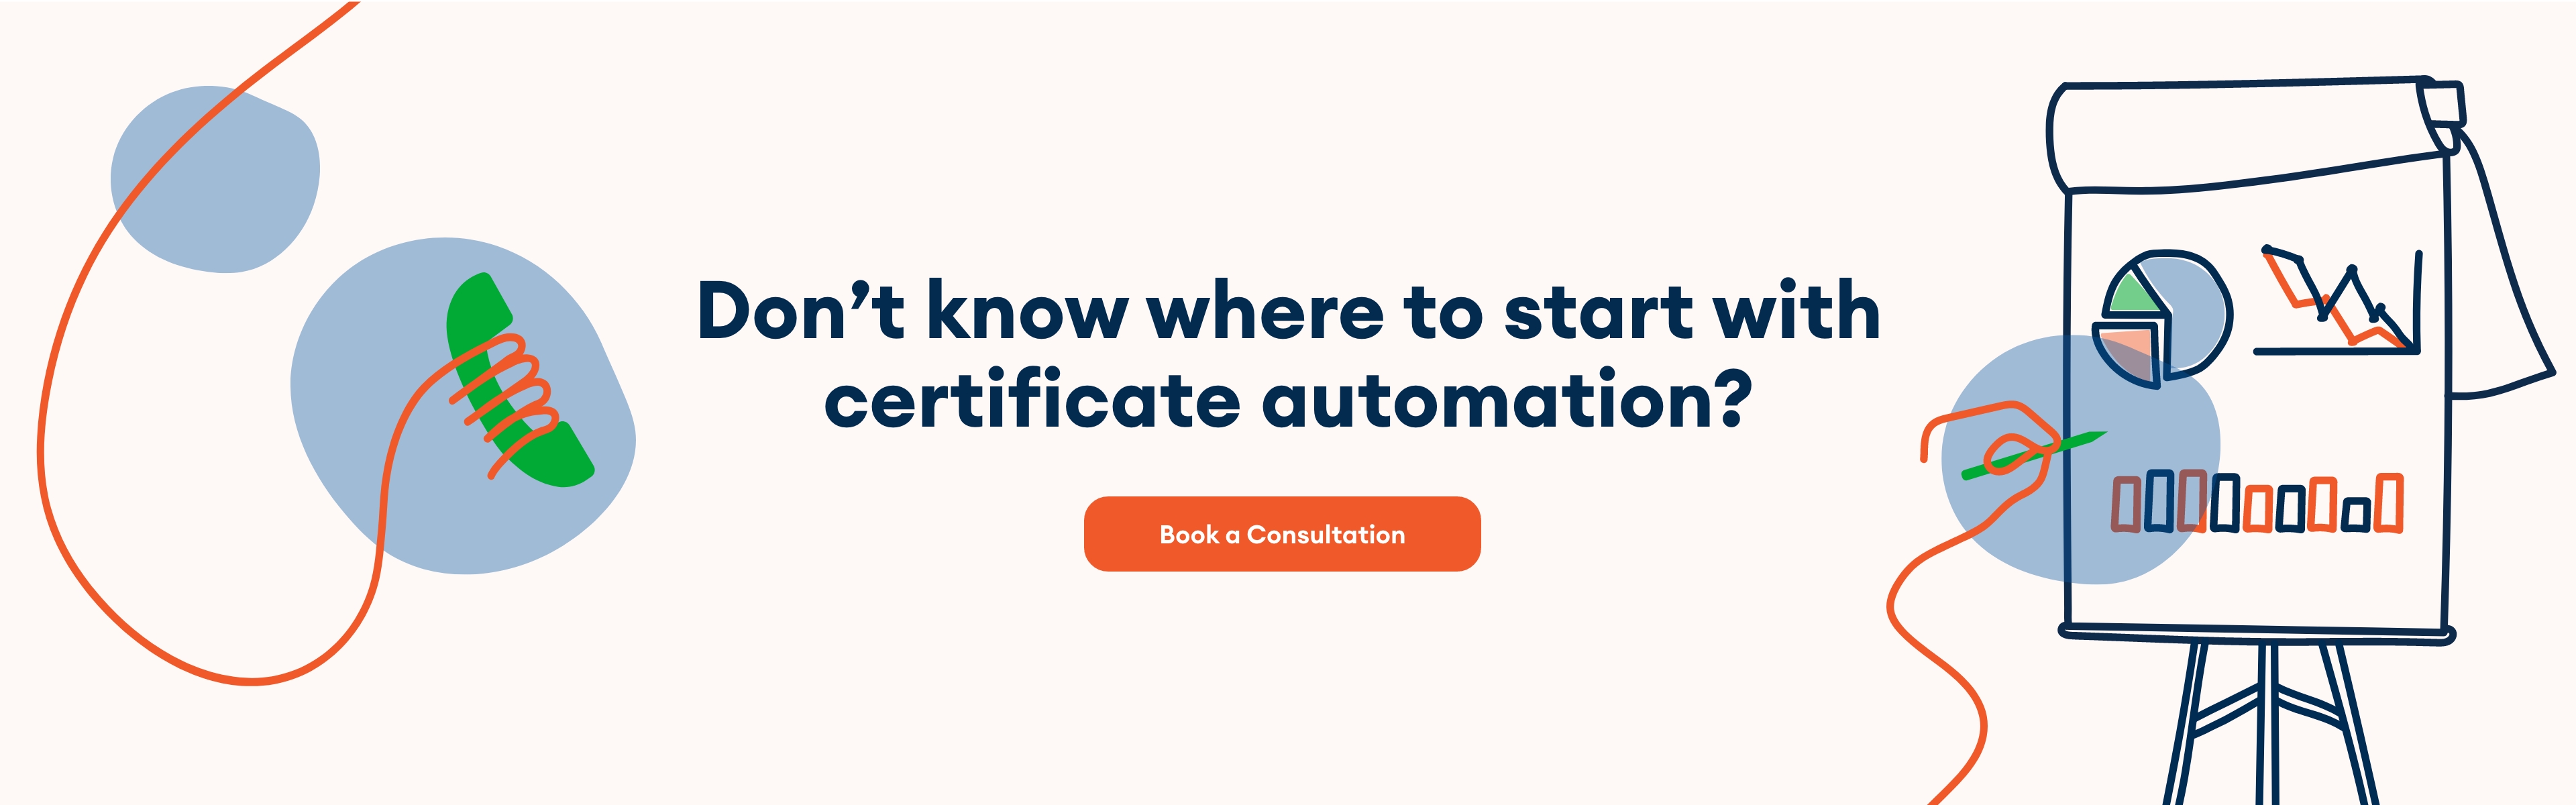 Automation-Dont-Know-Where-to-Start-CTA.jpg